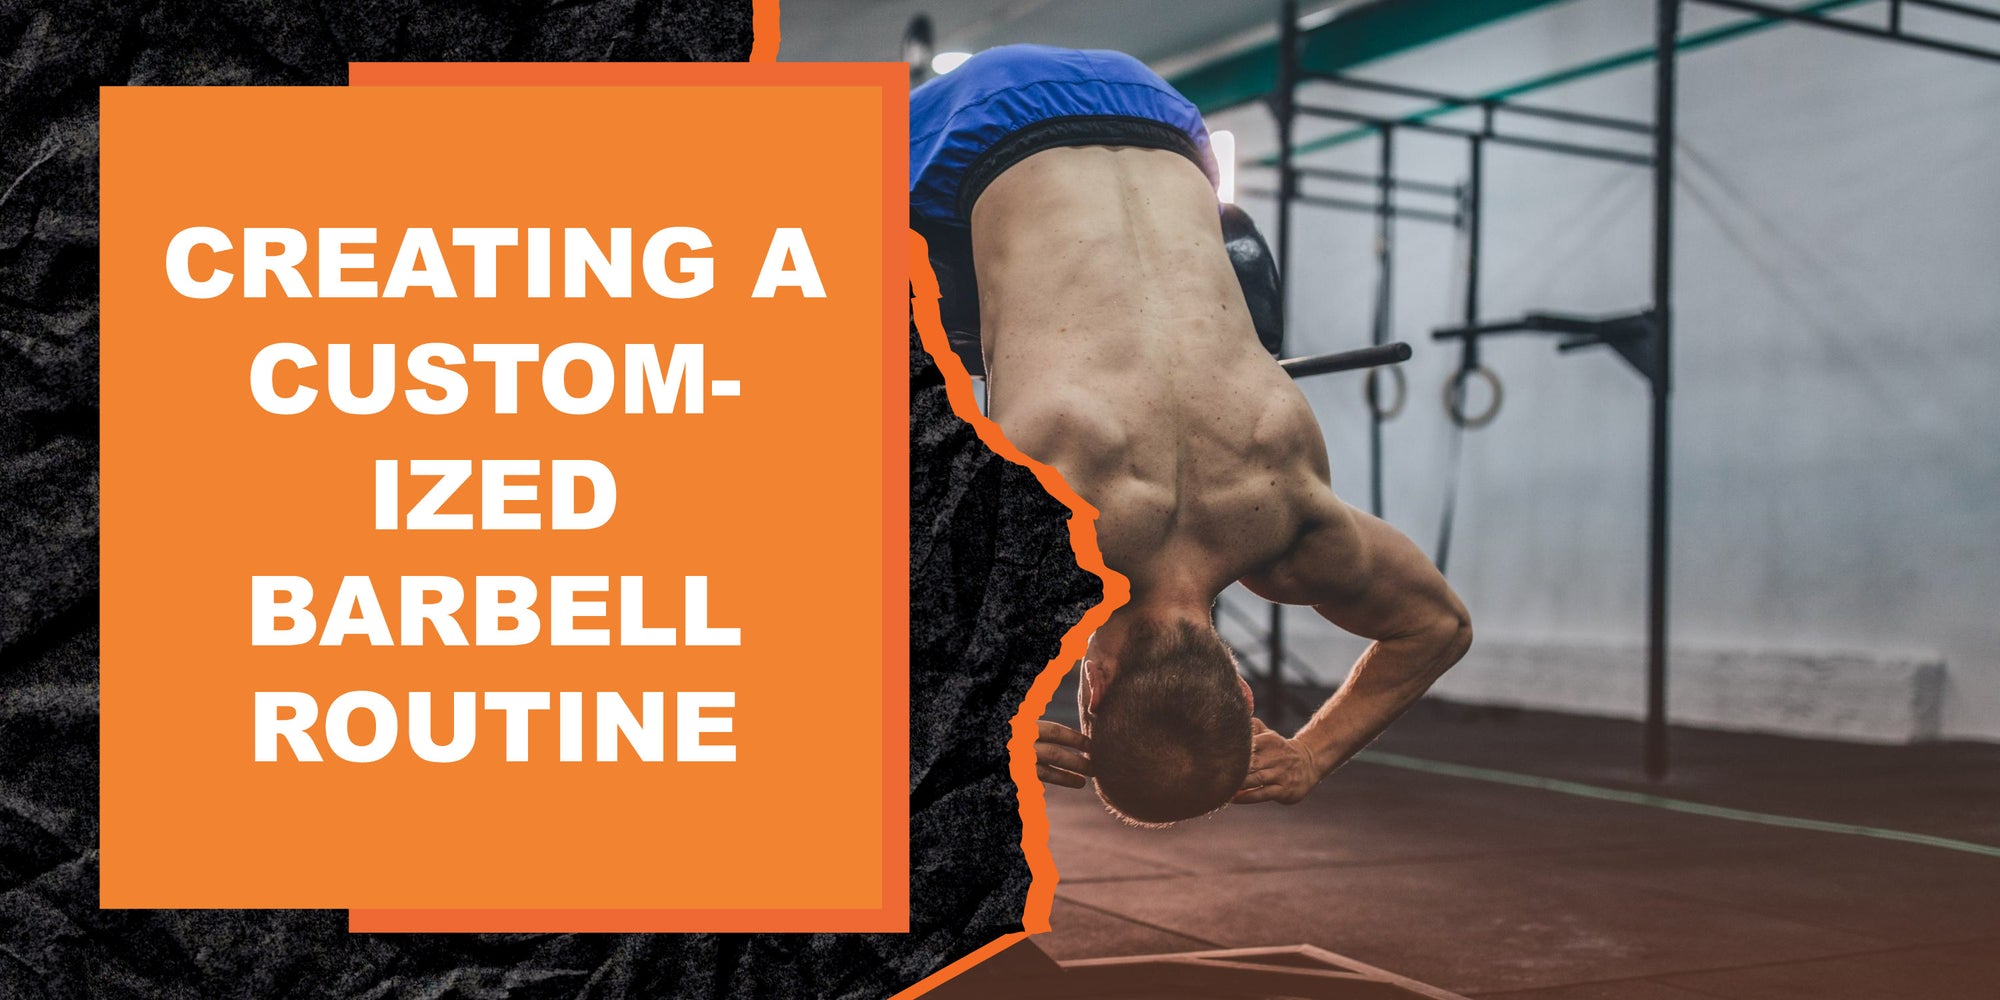 Creating a Customized Barbell Routine